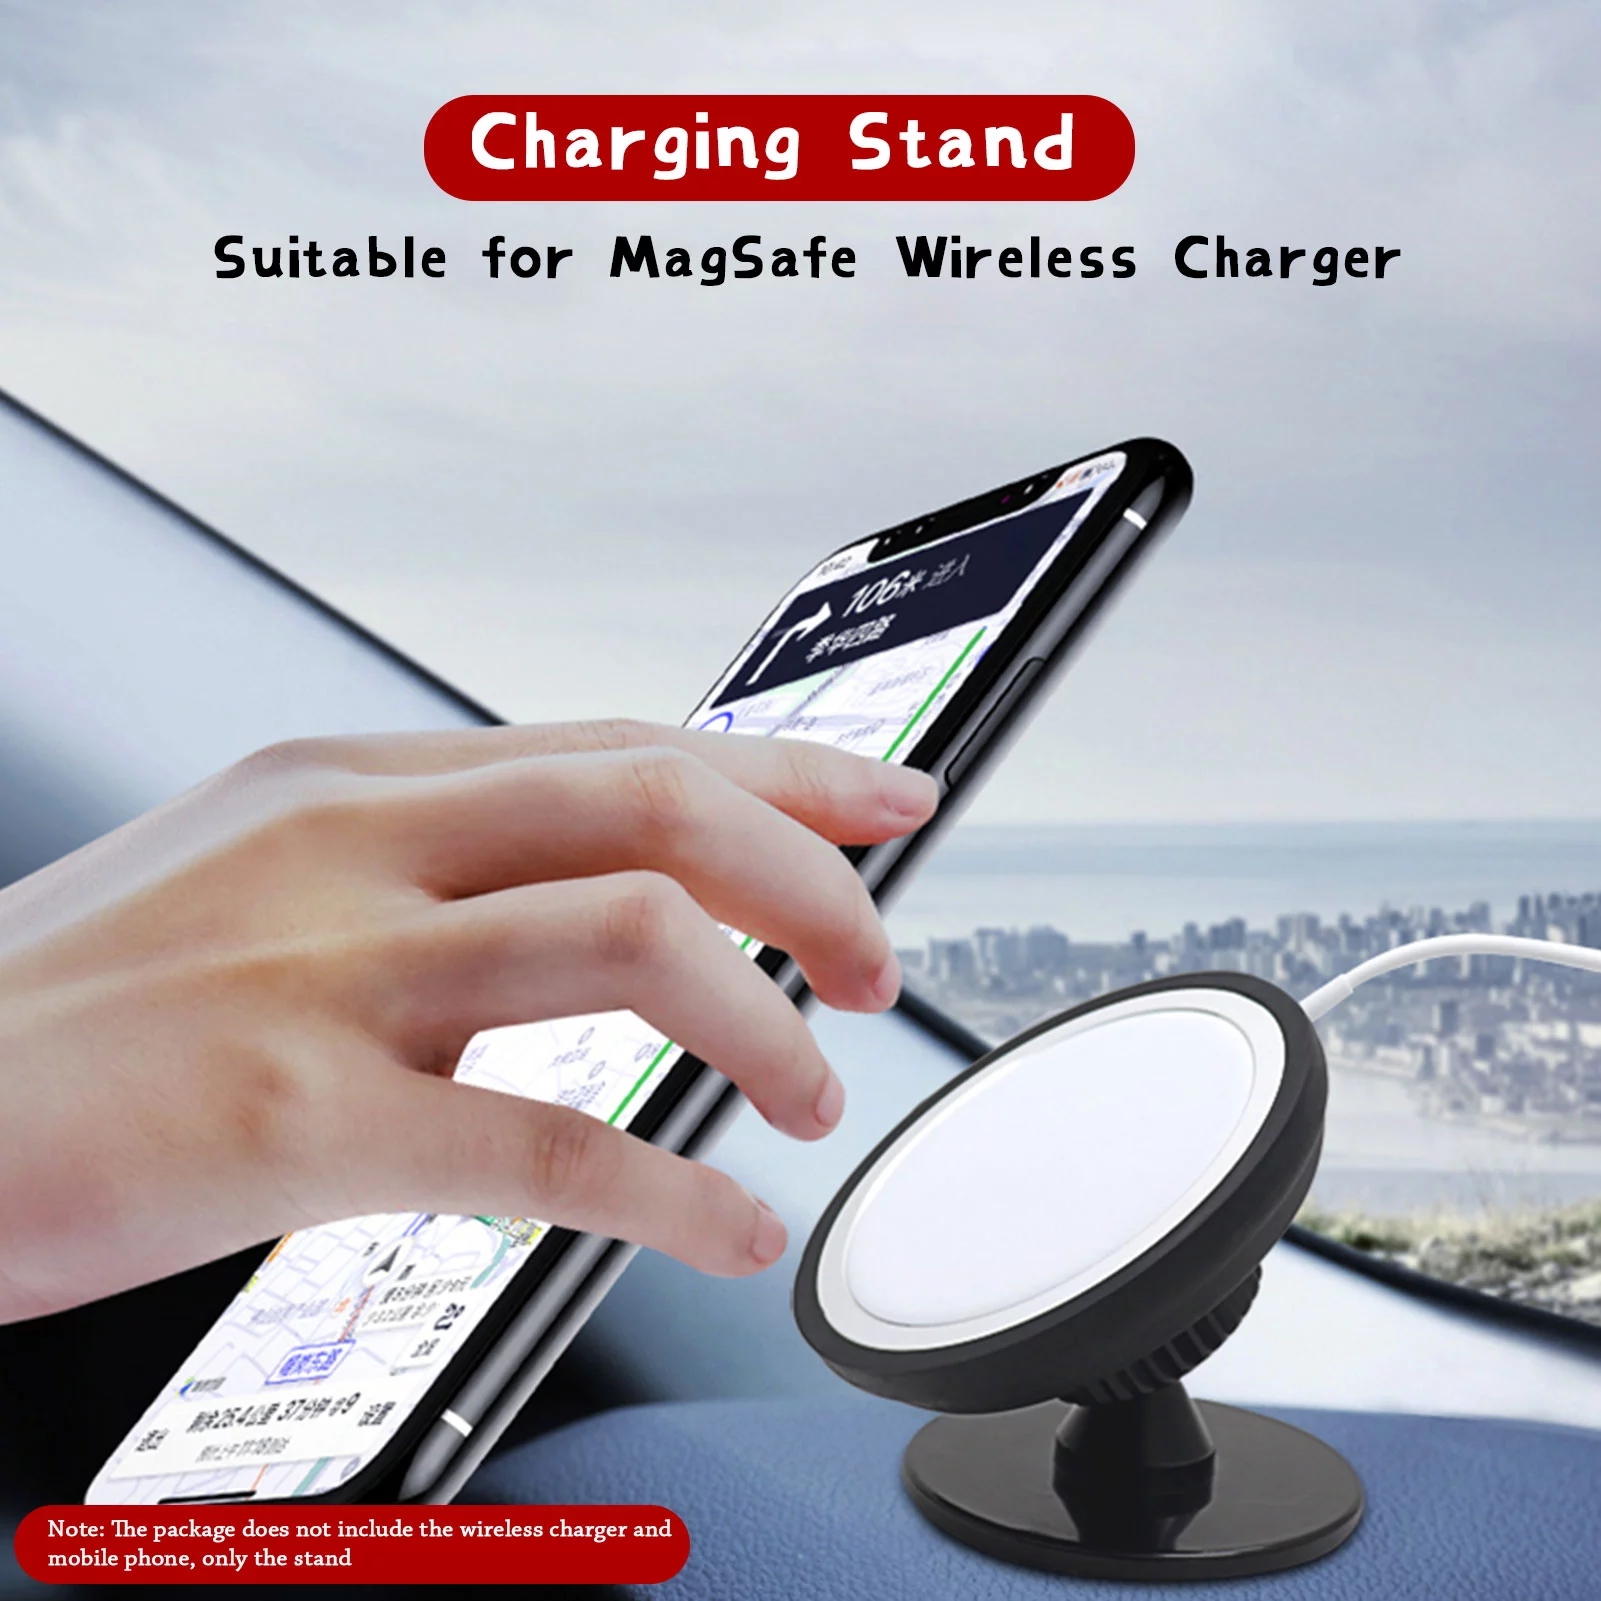 Bakeey-MagSafe-Wireless-Charger-360deg-Rotation-Adjustable-Car-Air-Vent--Dashboard-Holder-Phone-Stan-1785494-1